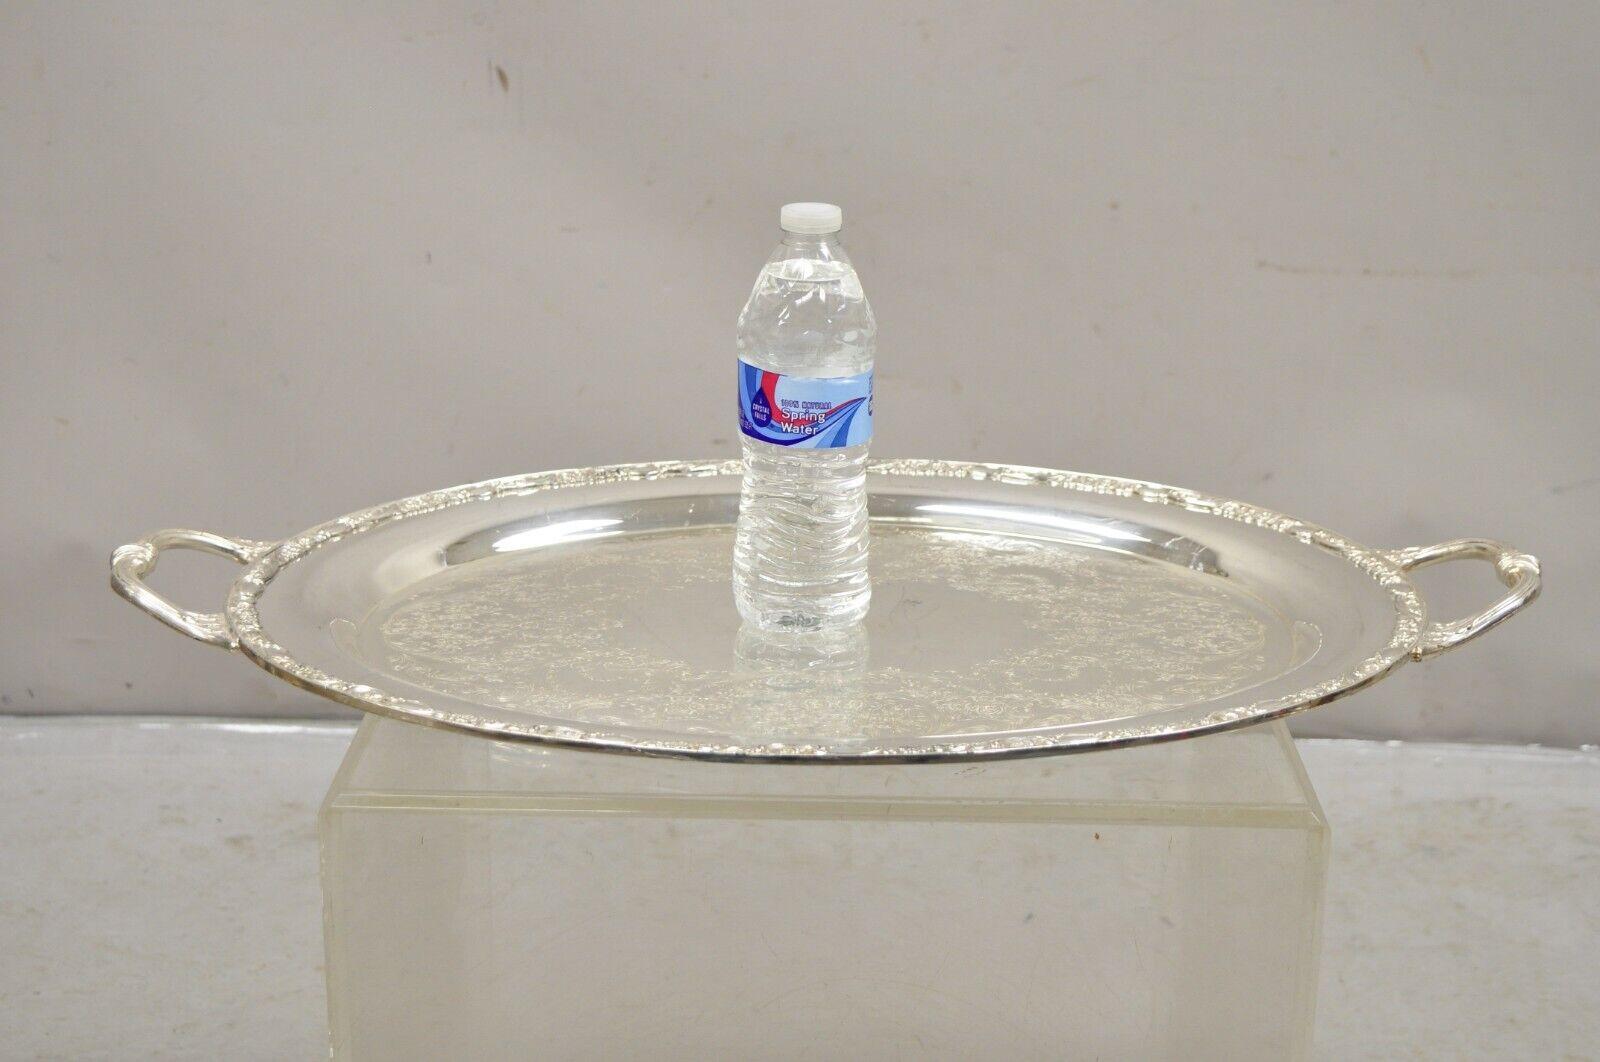 WM Rogers & Son Victorian Rose 1982 Silver Plated Oval Serving Platter Tray For Sale 5